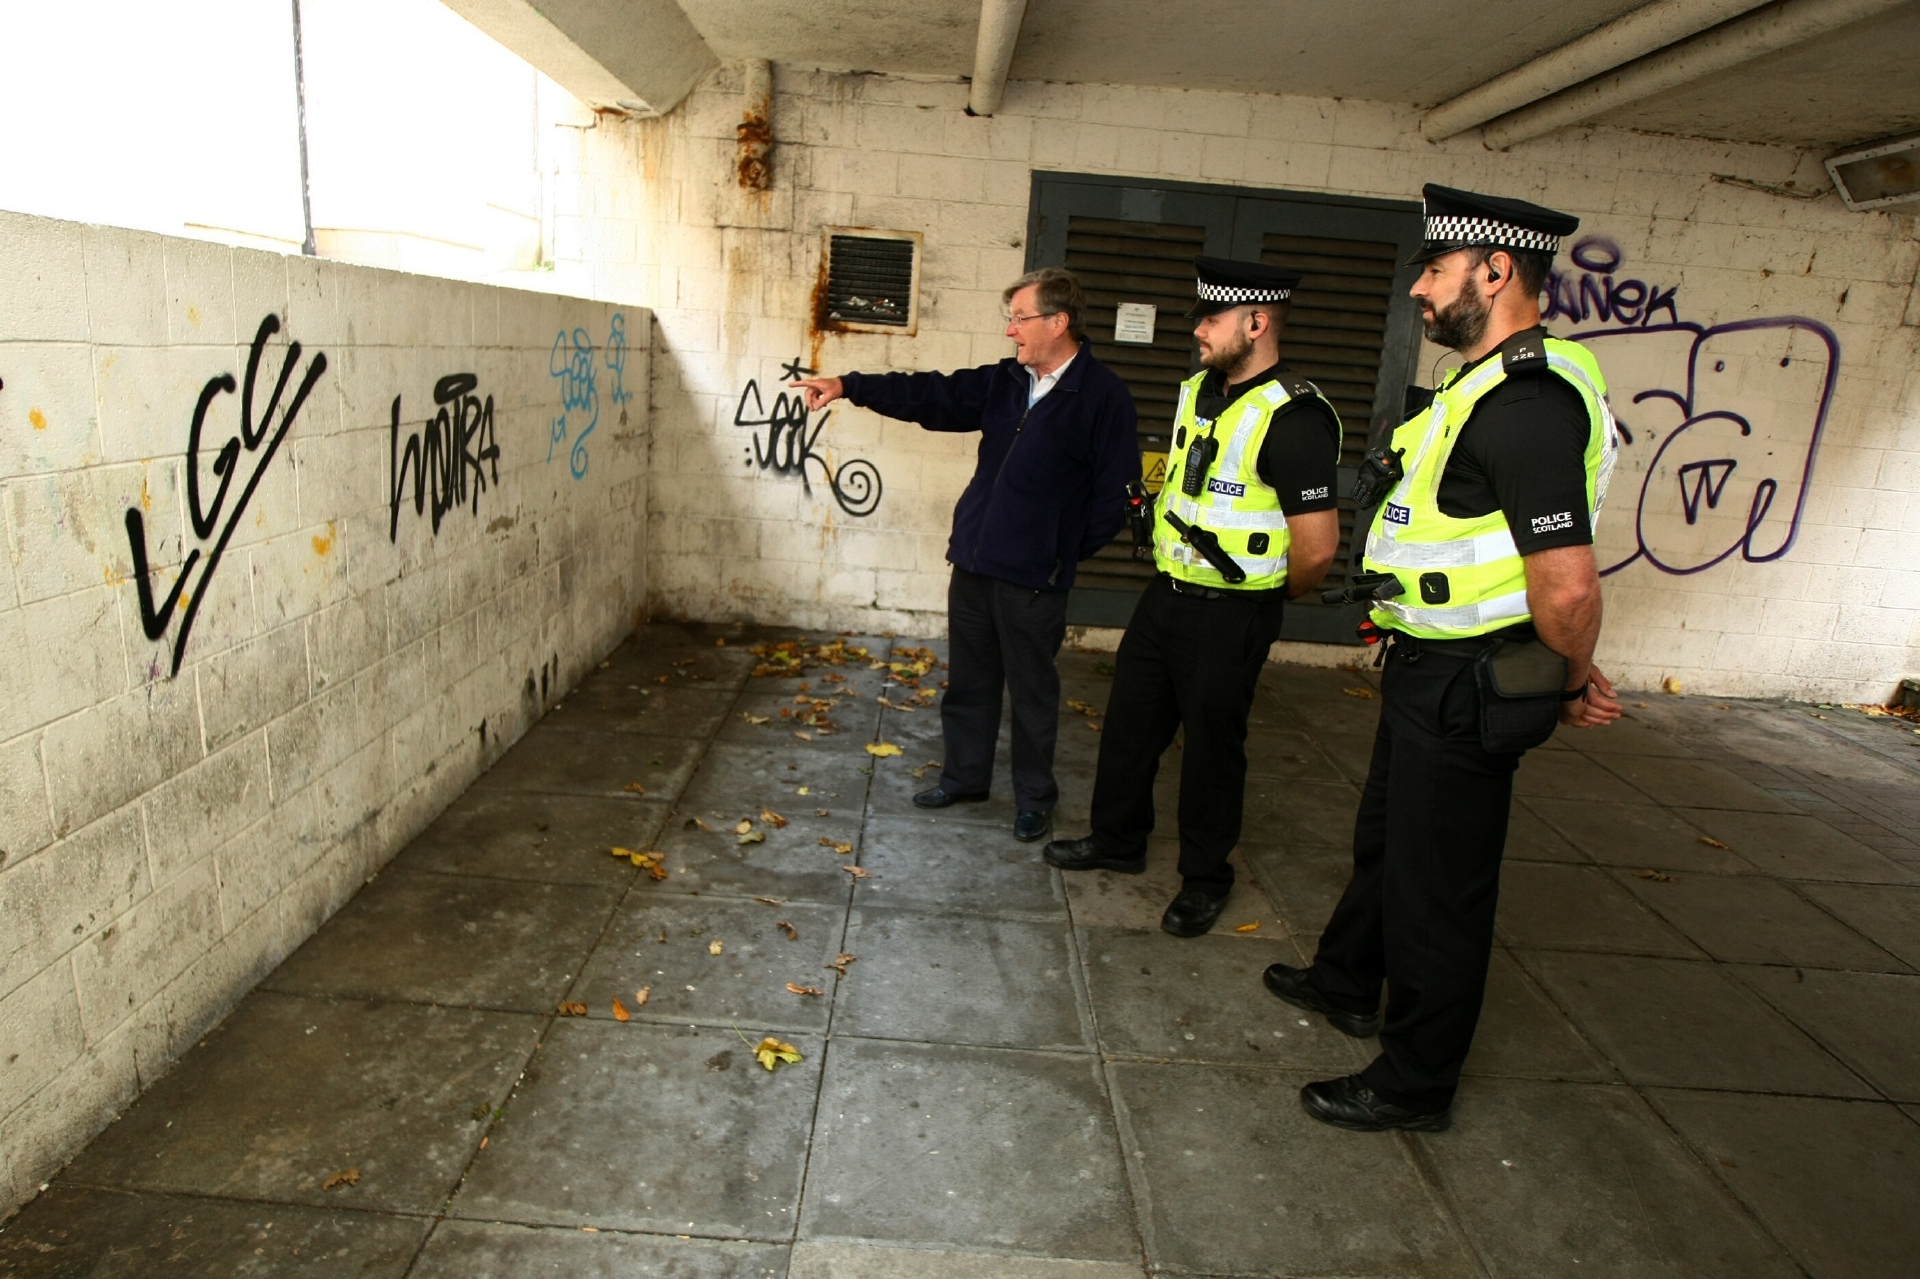 L-R: David Henderson - Chairman of Kirkcaldy West Community Council, Constable Cameron Lee and Constable Mark McCulloch, beside some of the graffiti at the back of the Postings in Kirkcaldy.